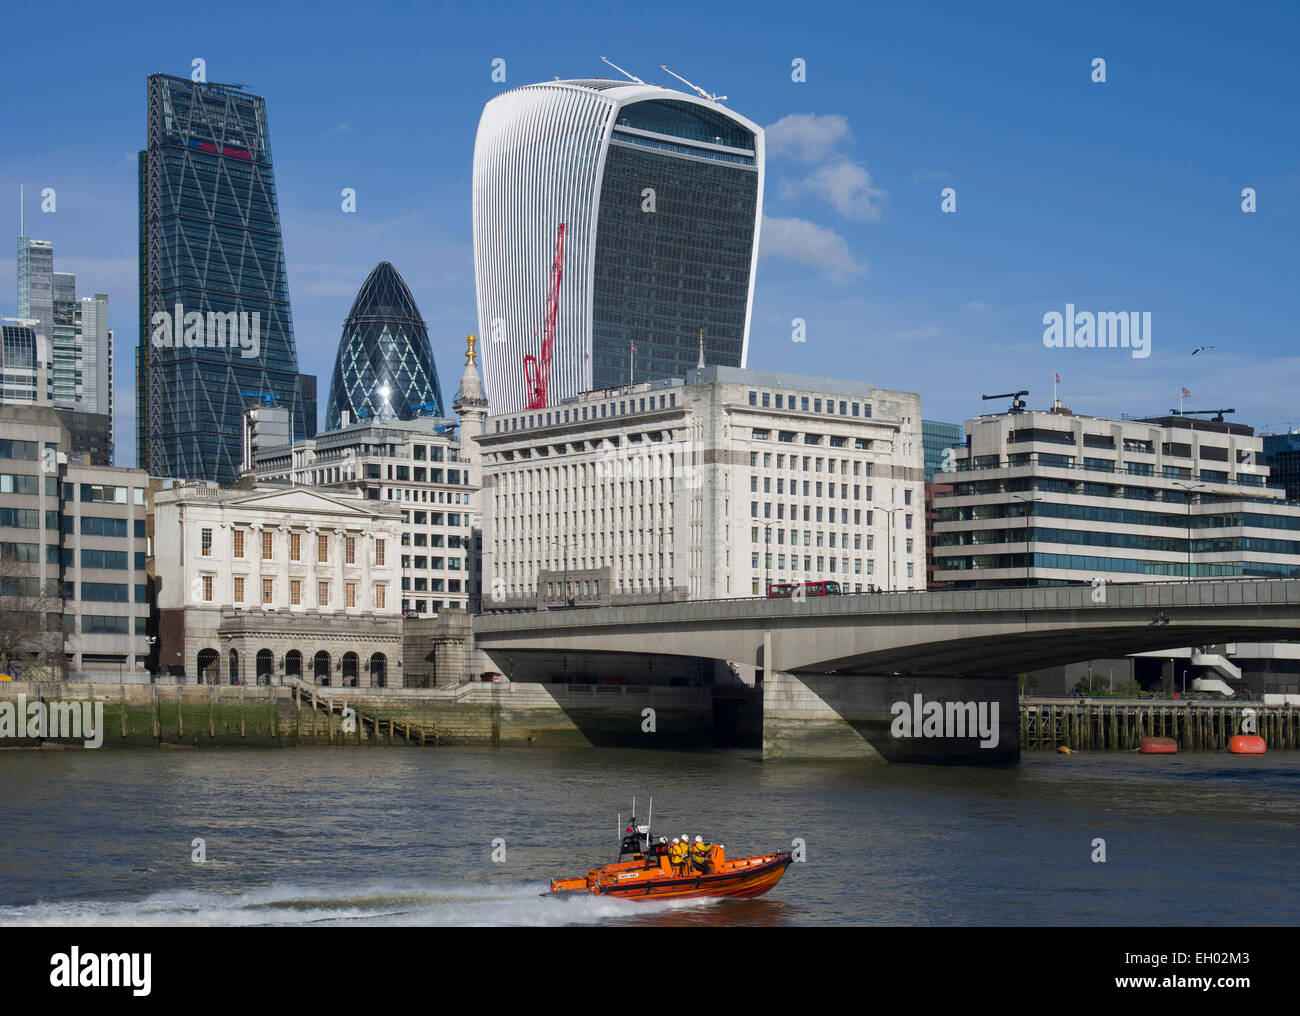 London City skyline with The Walkie Talkie, The Gherkin and The Cheese Grater to the left. type E lifeboat Rib Hulrey Burley the Stock Photo